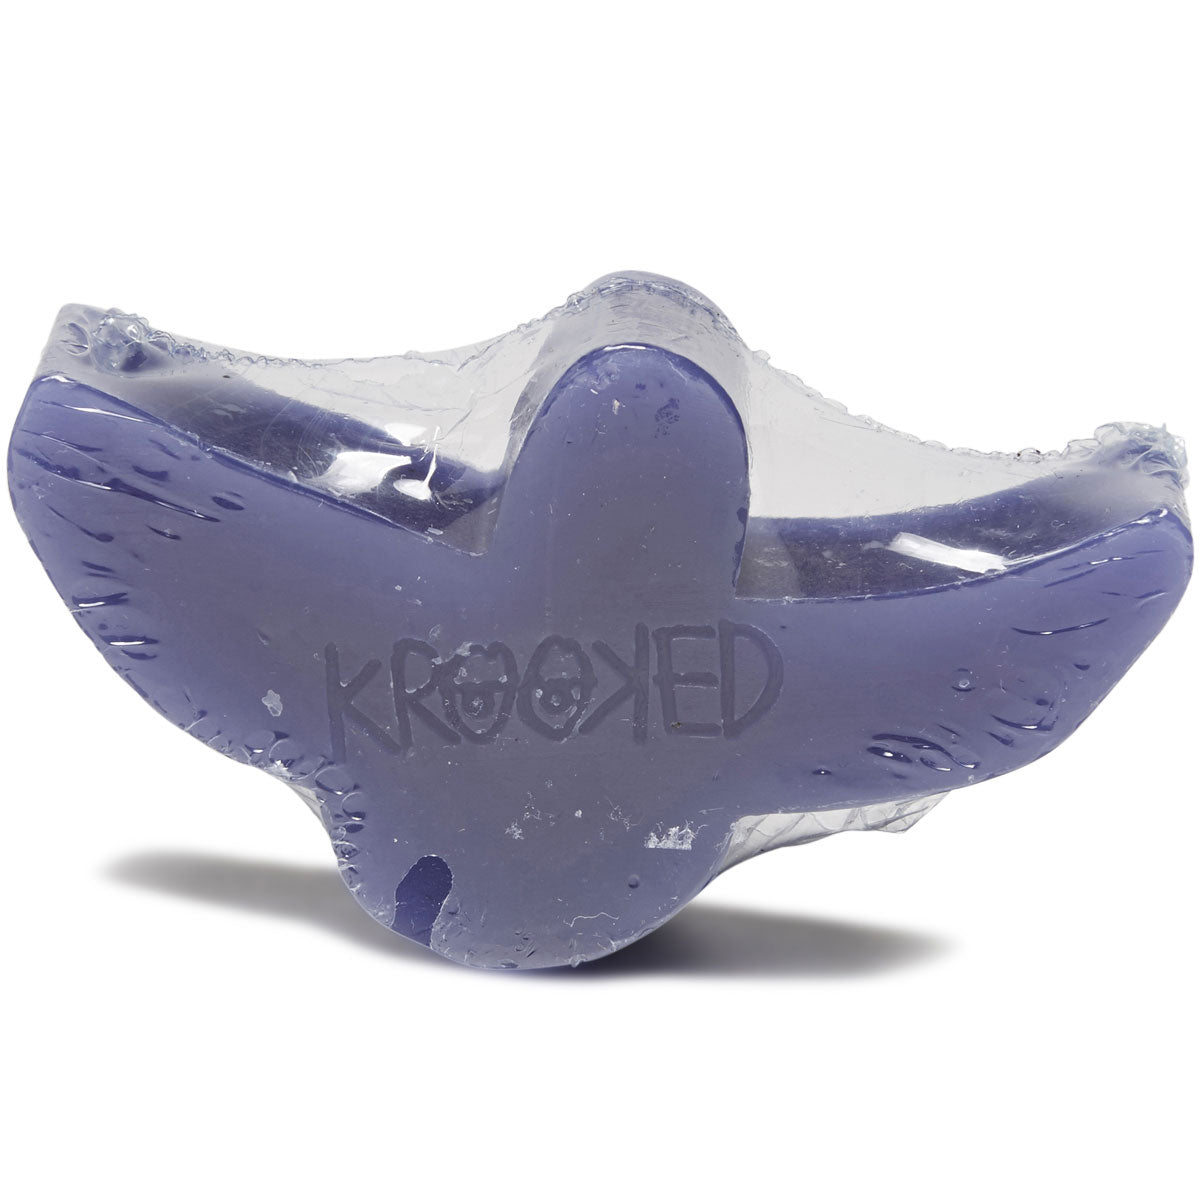 Krooked Birdy Skate Wax image 2